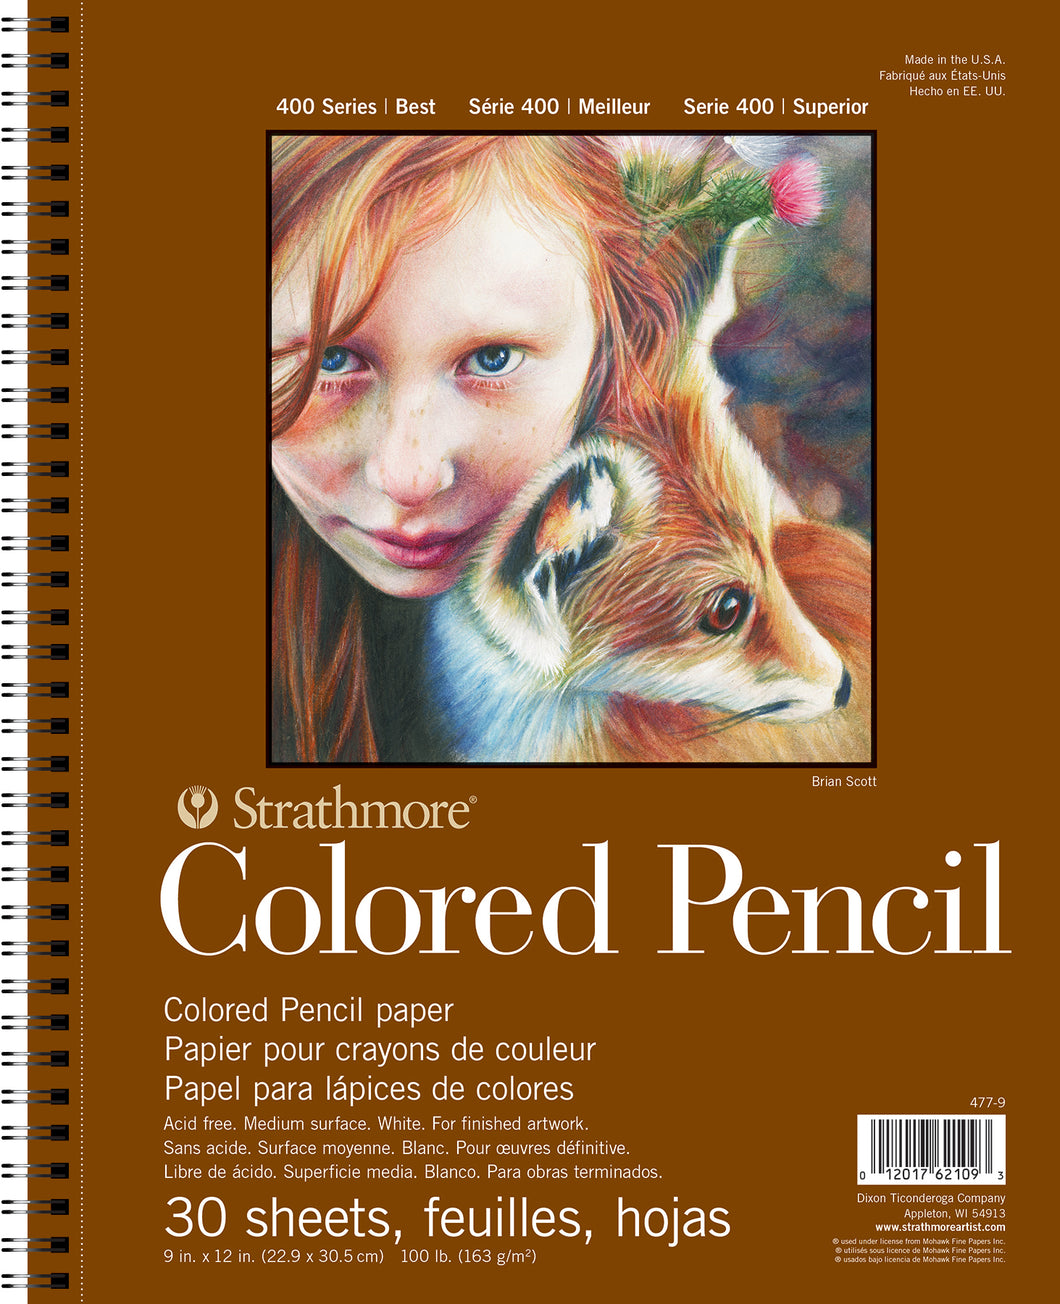 Strathmore Colored Pencil Pad, 400 Series, 30 Sheets, 9